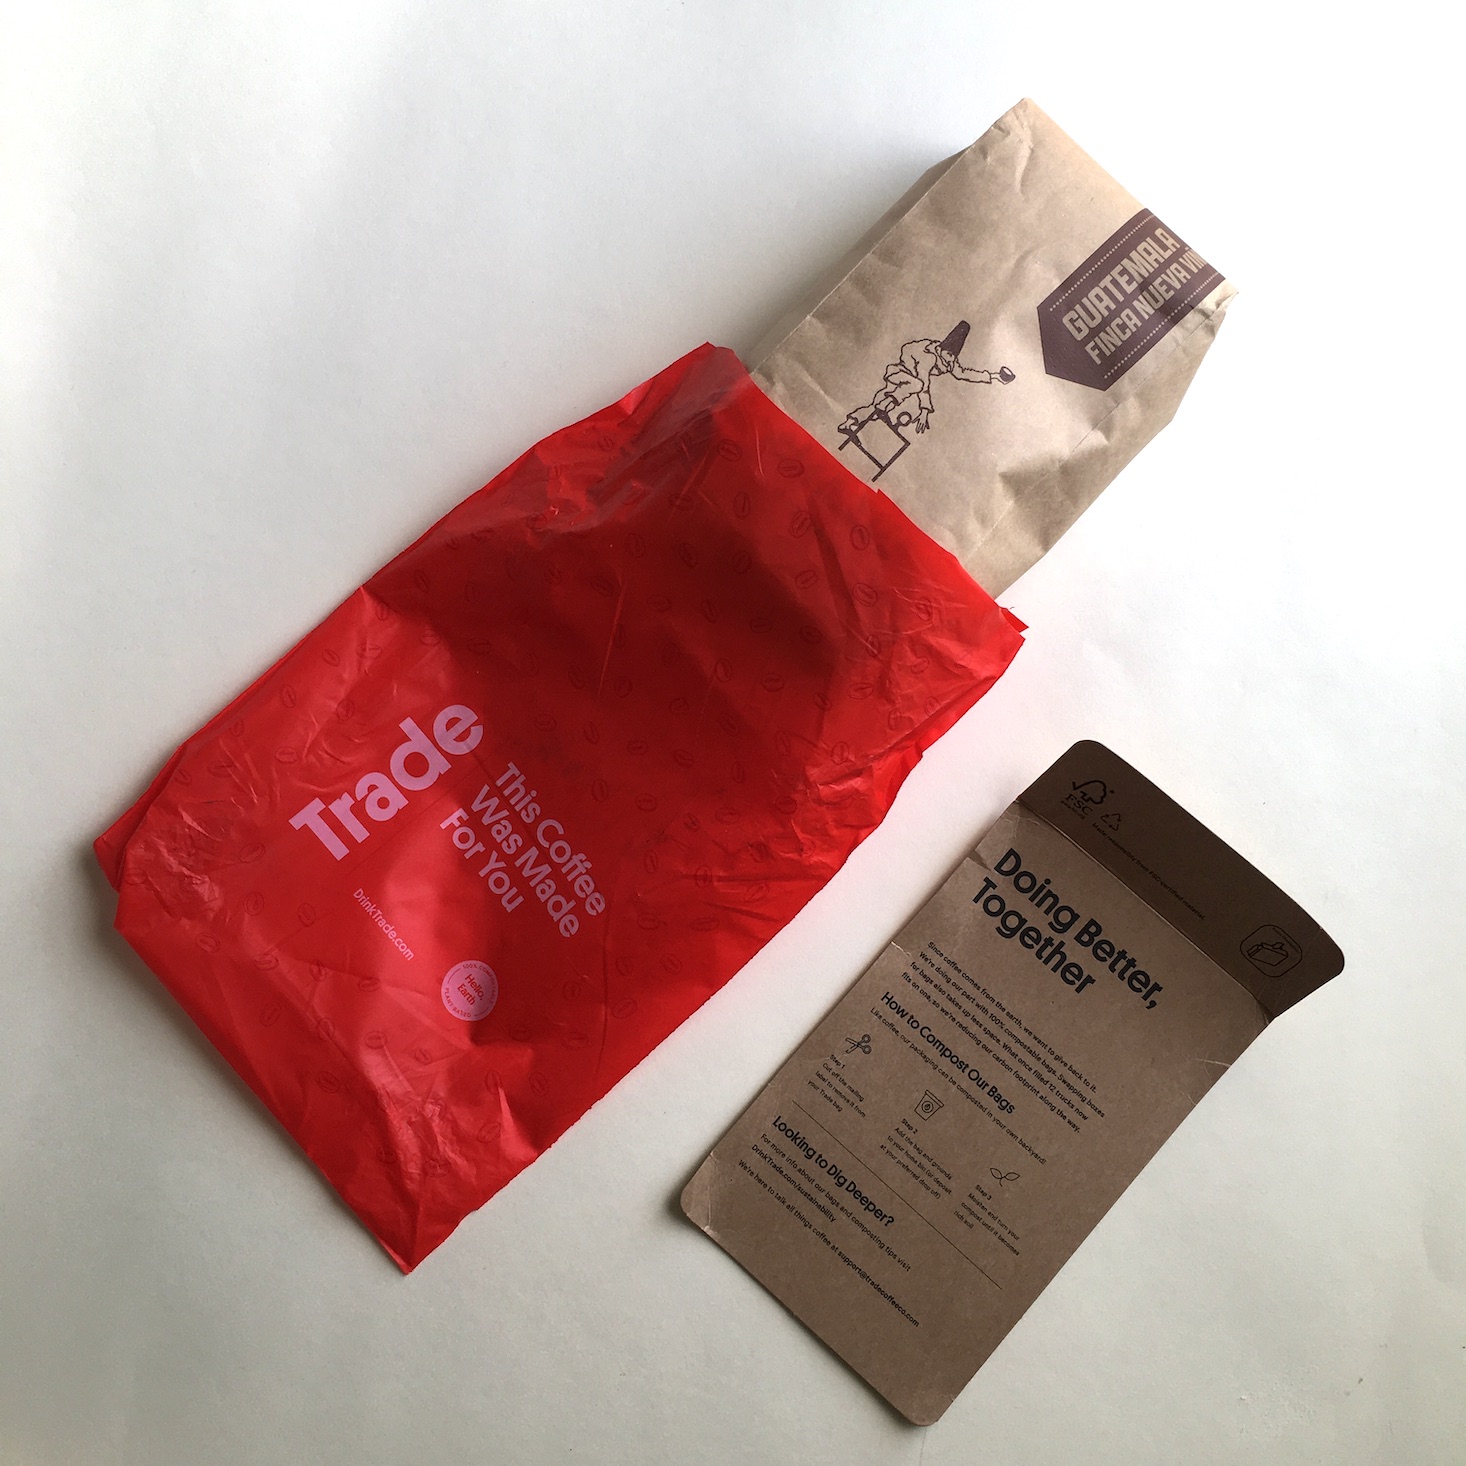 Trade coffee shipment featuring compostable packaging and recyclable instructions.